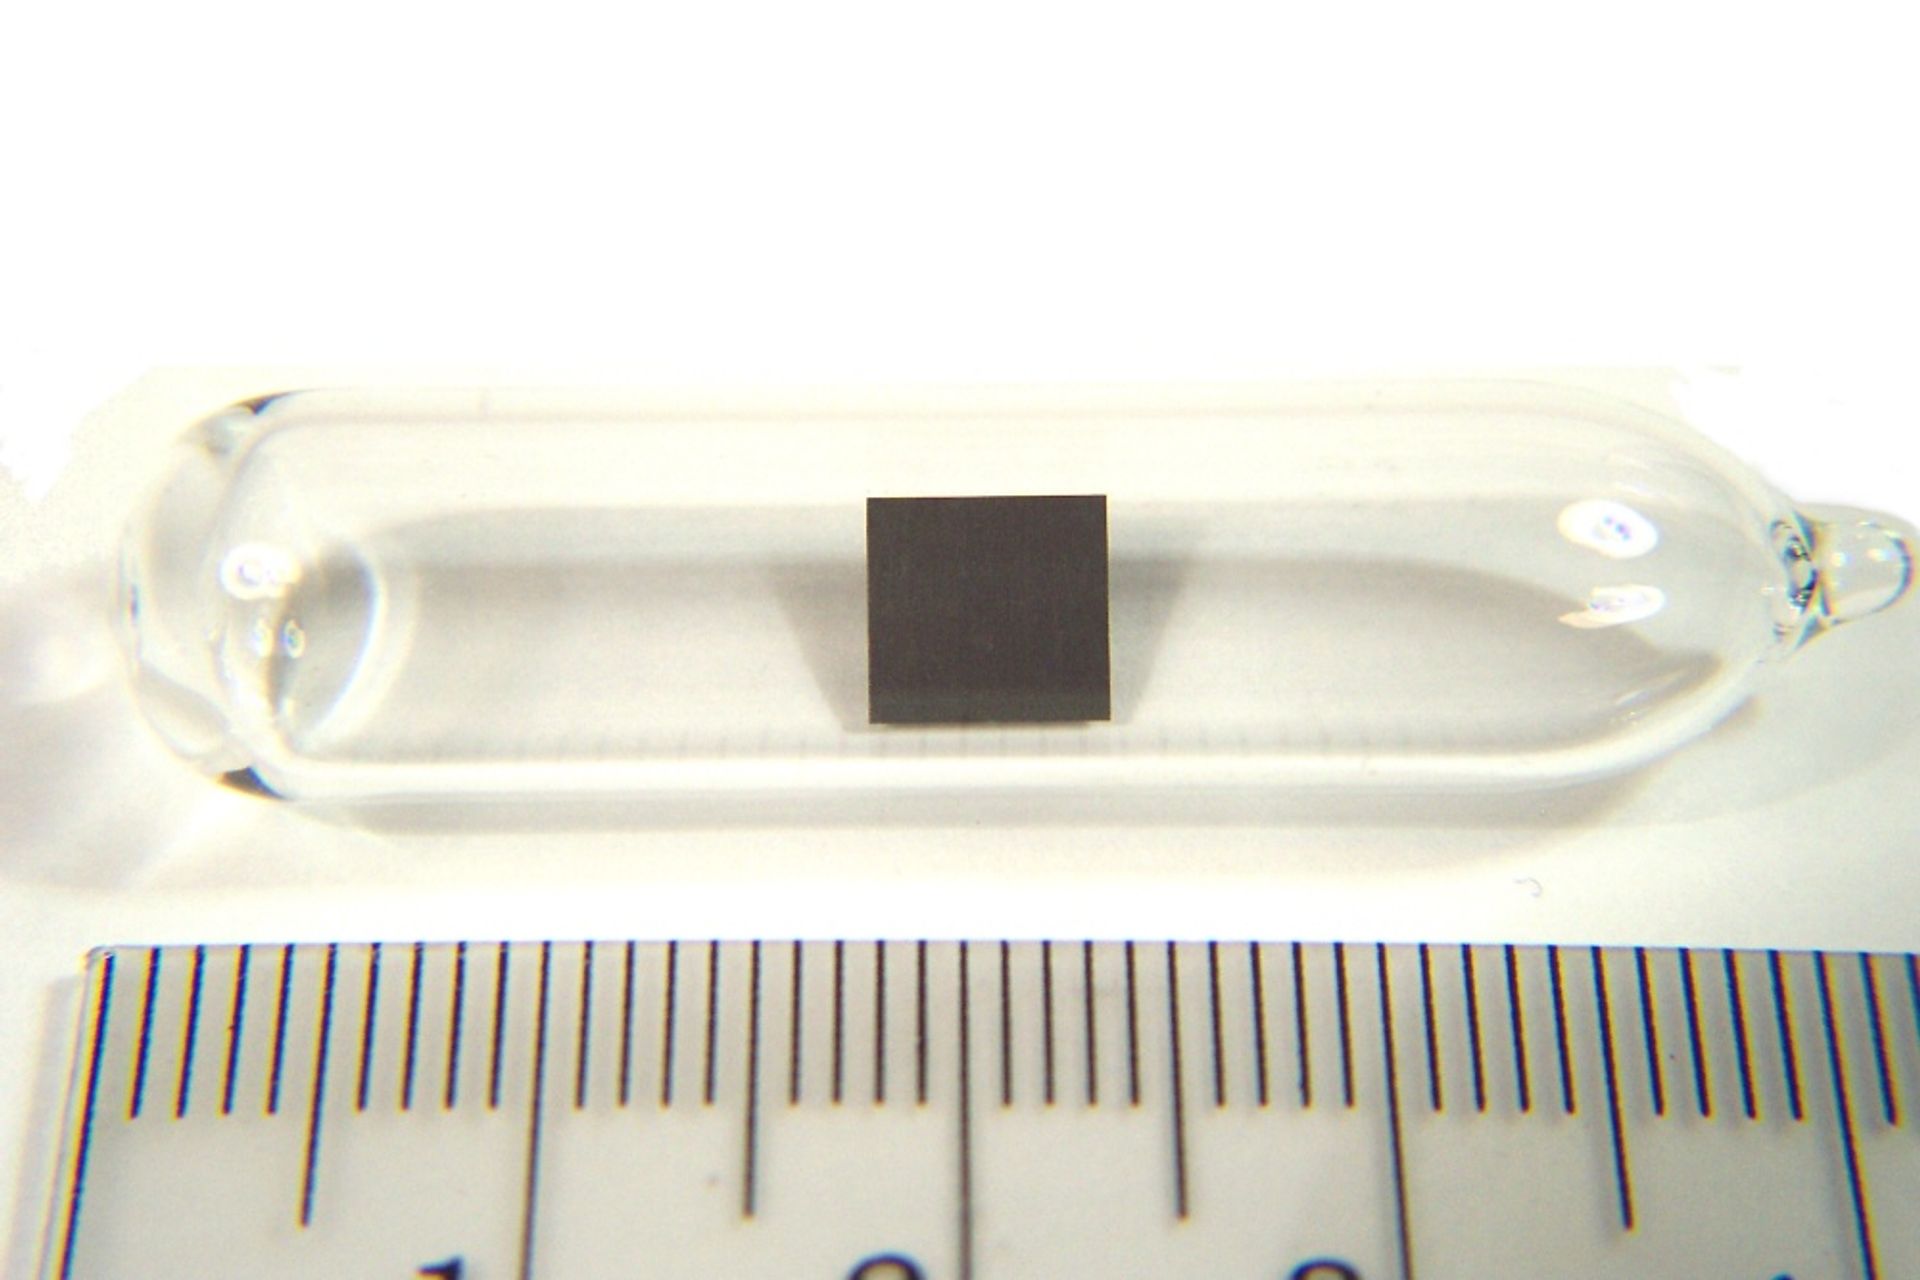 A sample of thorium in the form of a thin sheet under argon in a glass ampoule